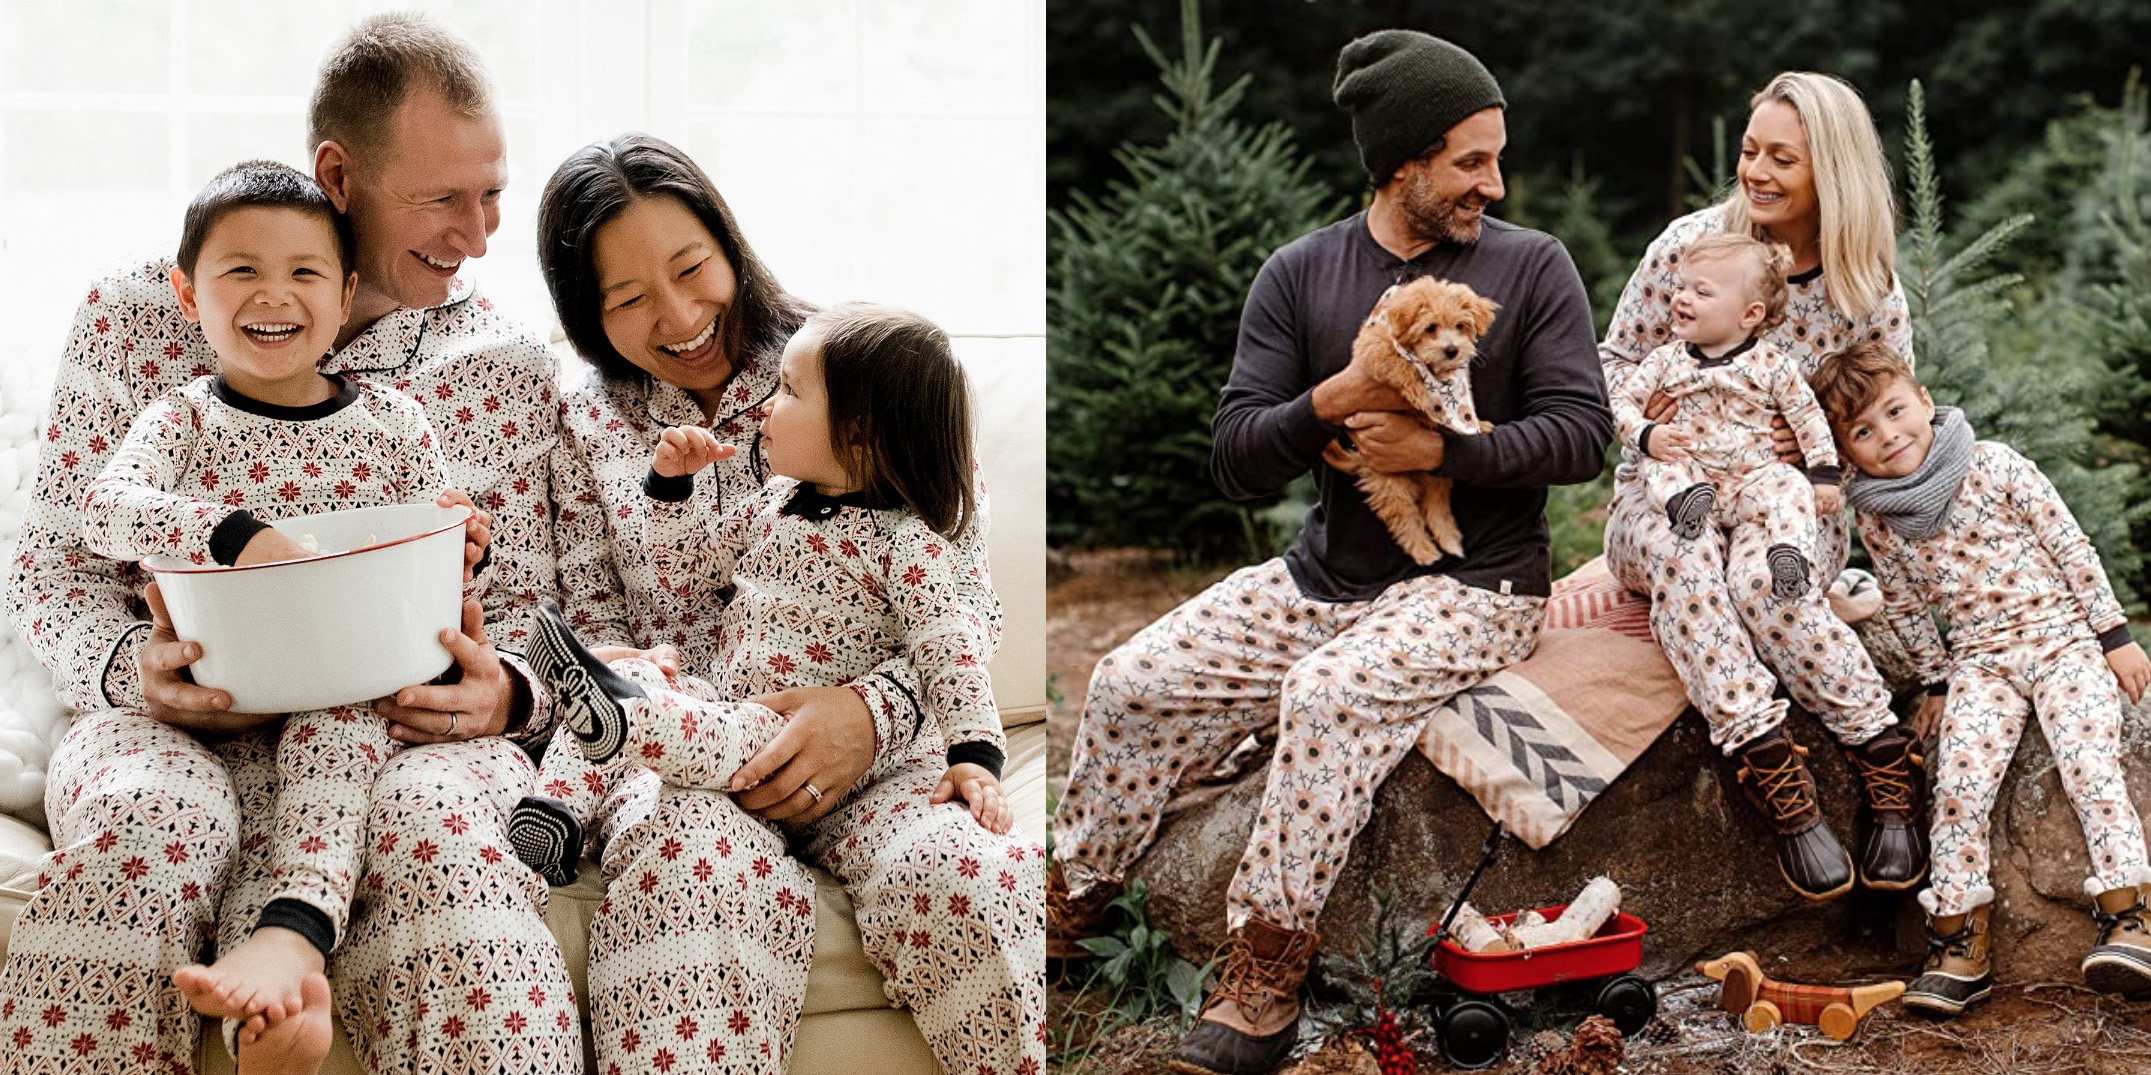 Burt's Bees matching family pajamas from $7.40 Prime shipped at Amazon